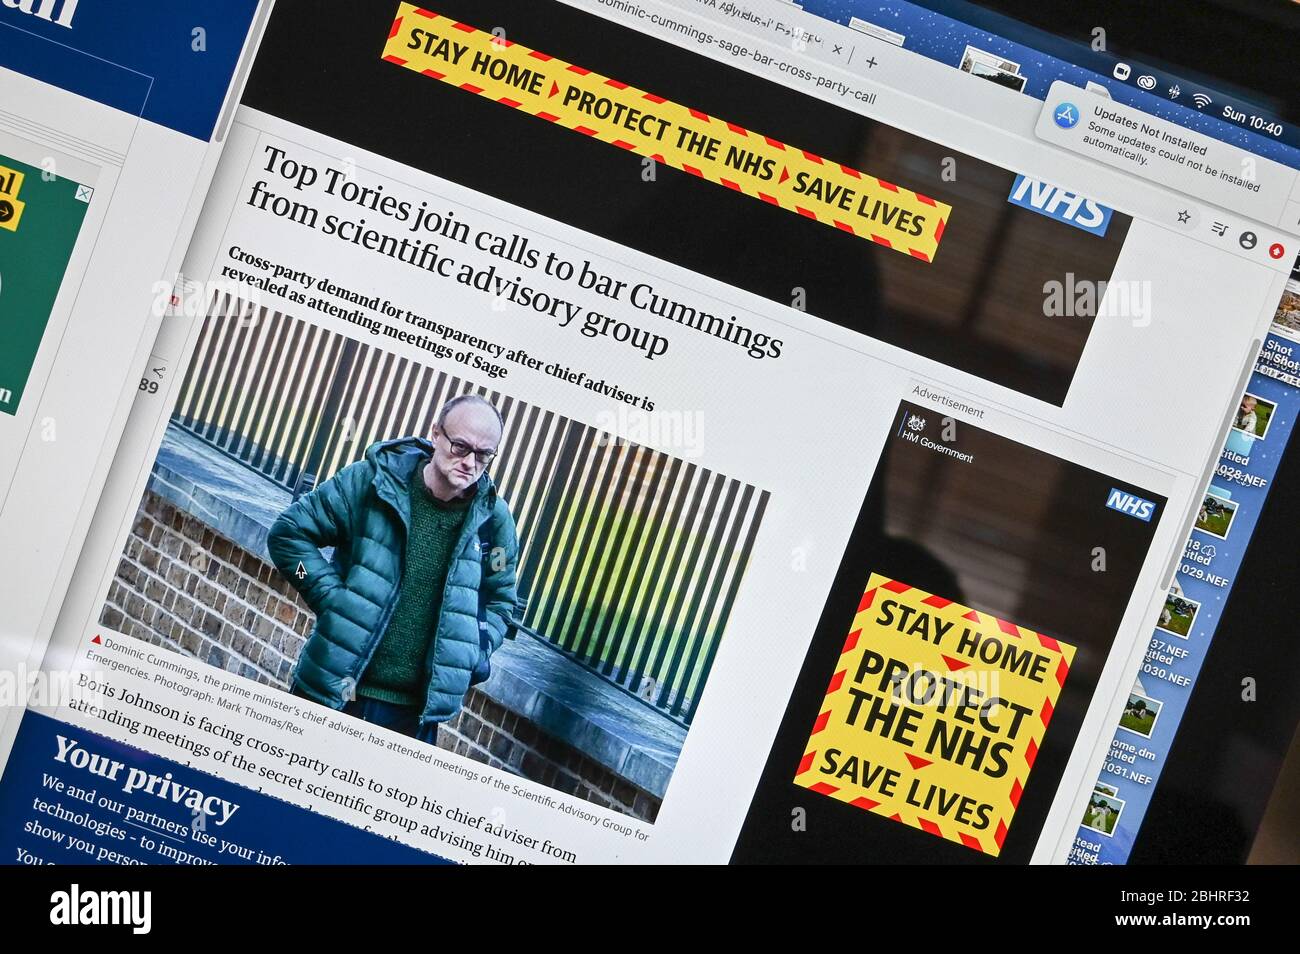 On-line public information Coronavirus/ Covid advert, 'Stay home, Protect the NHS' juxtaposed against an article and photo featuring Dominic Cummings. Stock Photo